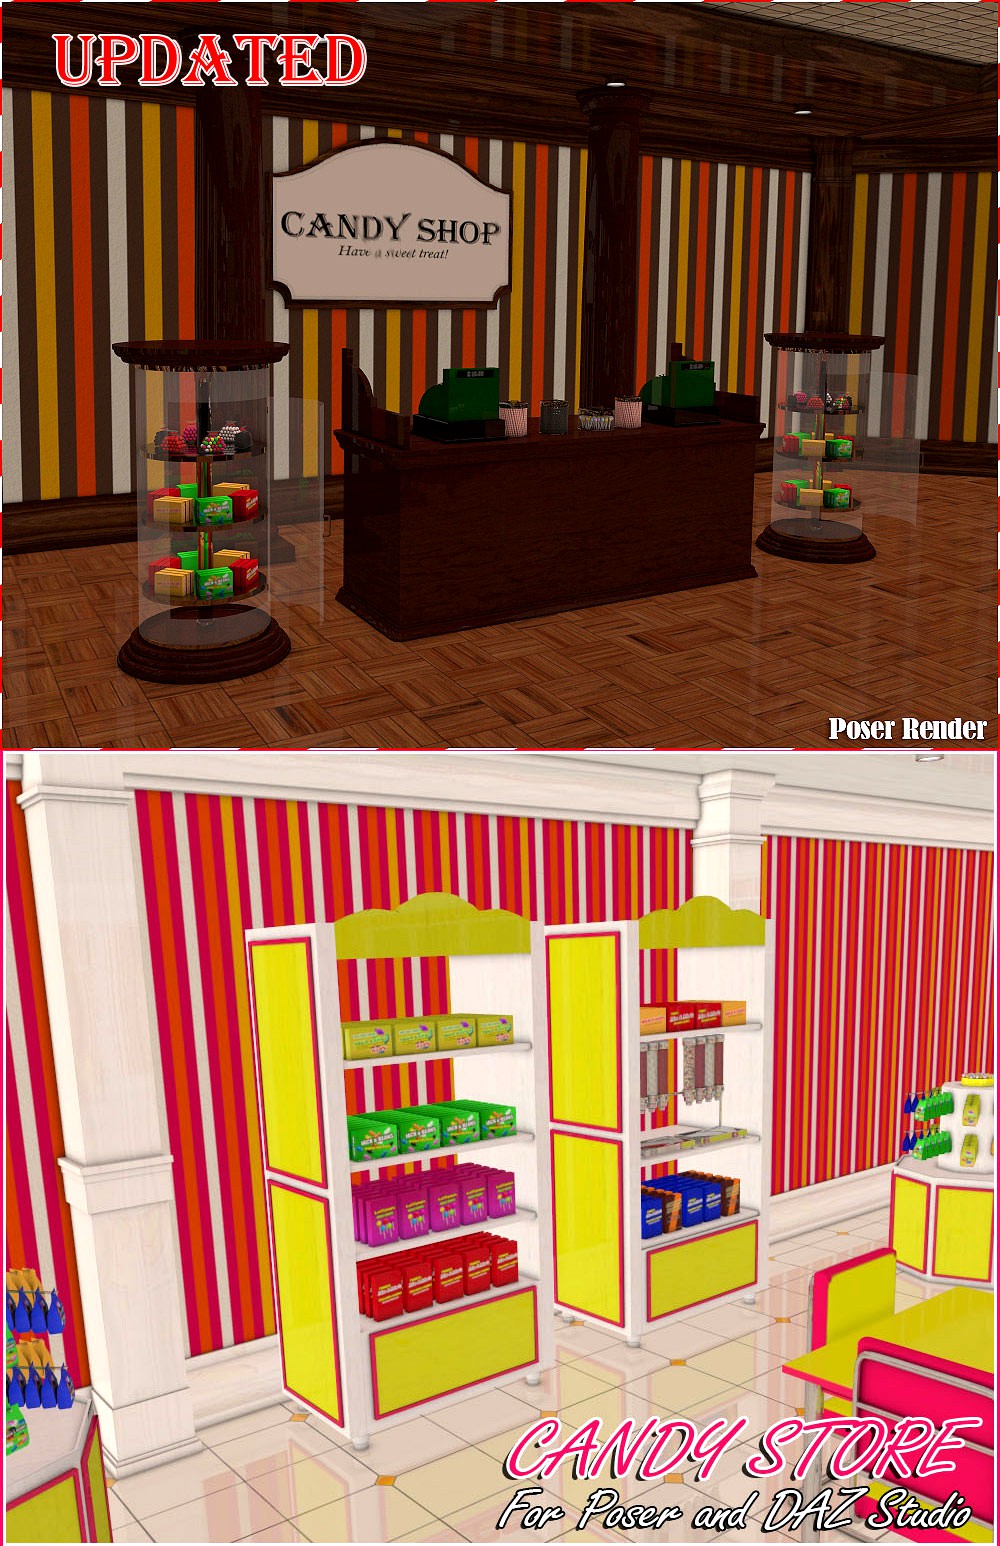 Candy Store Interior - Extended License